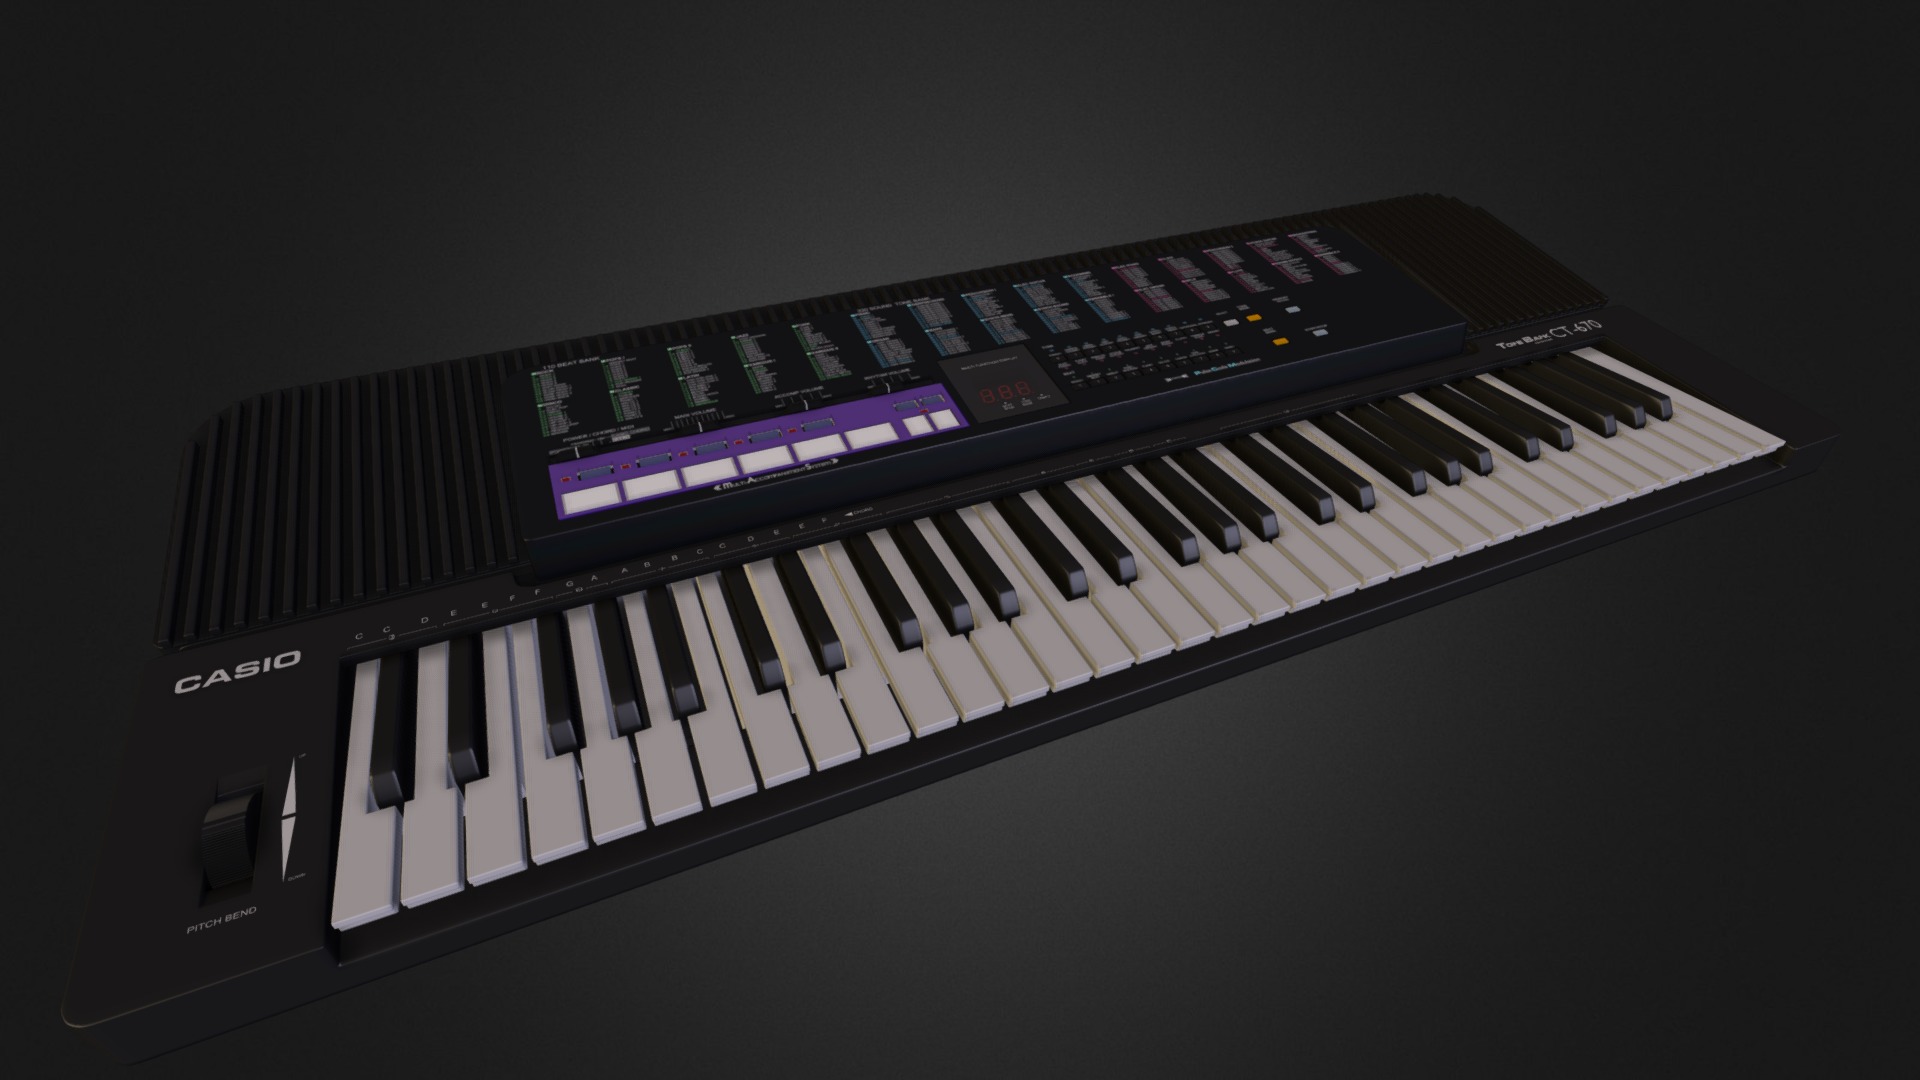 3D model Casio CT-670 keyboard - This is a 3D model of the Casio CT-670 keyboard. The 3D model is about a black and white keyboard.